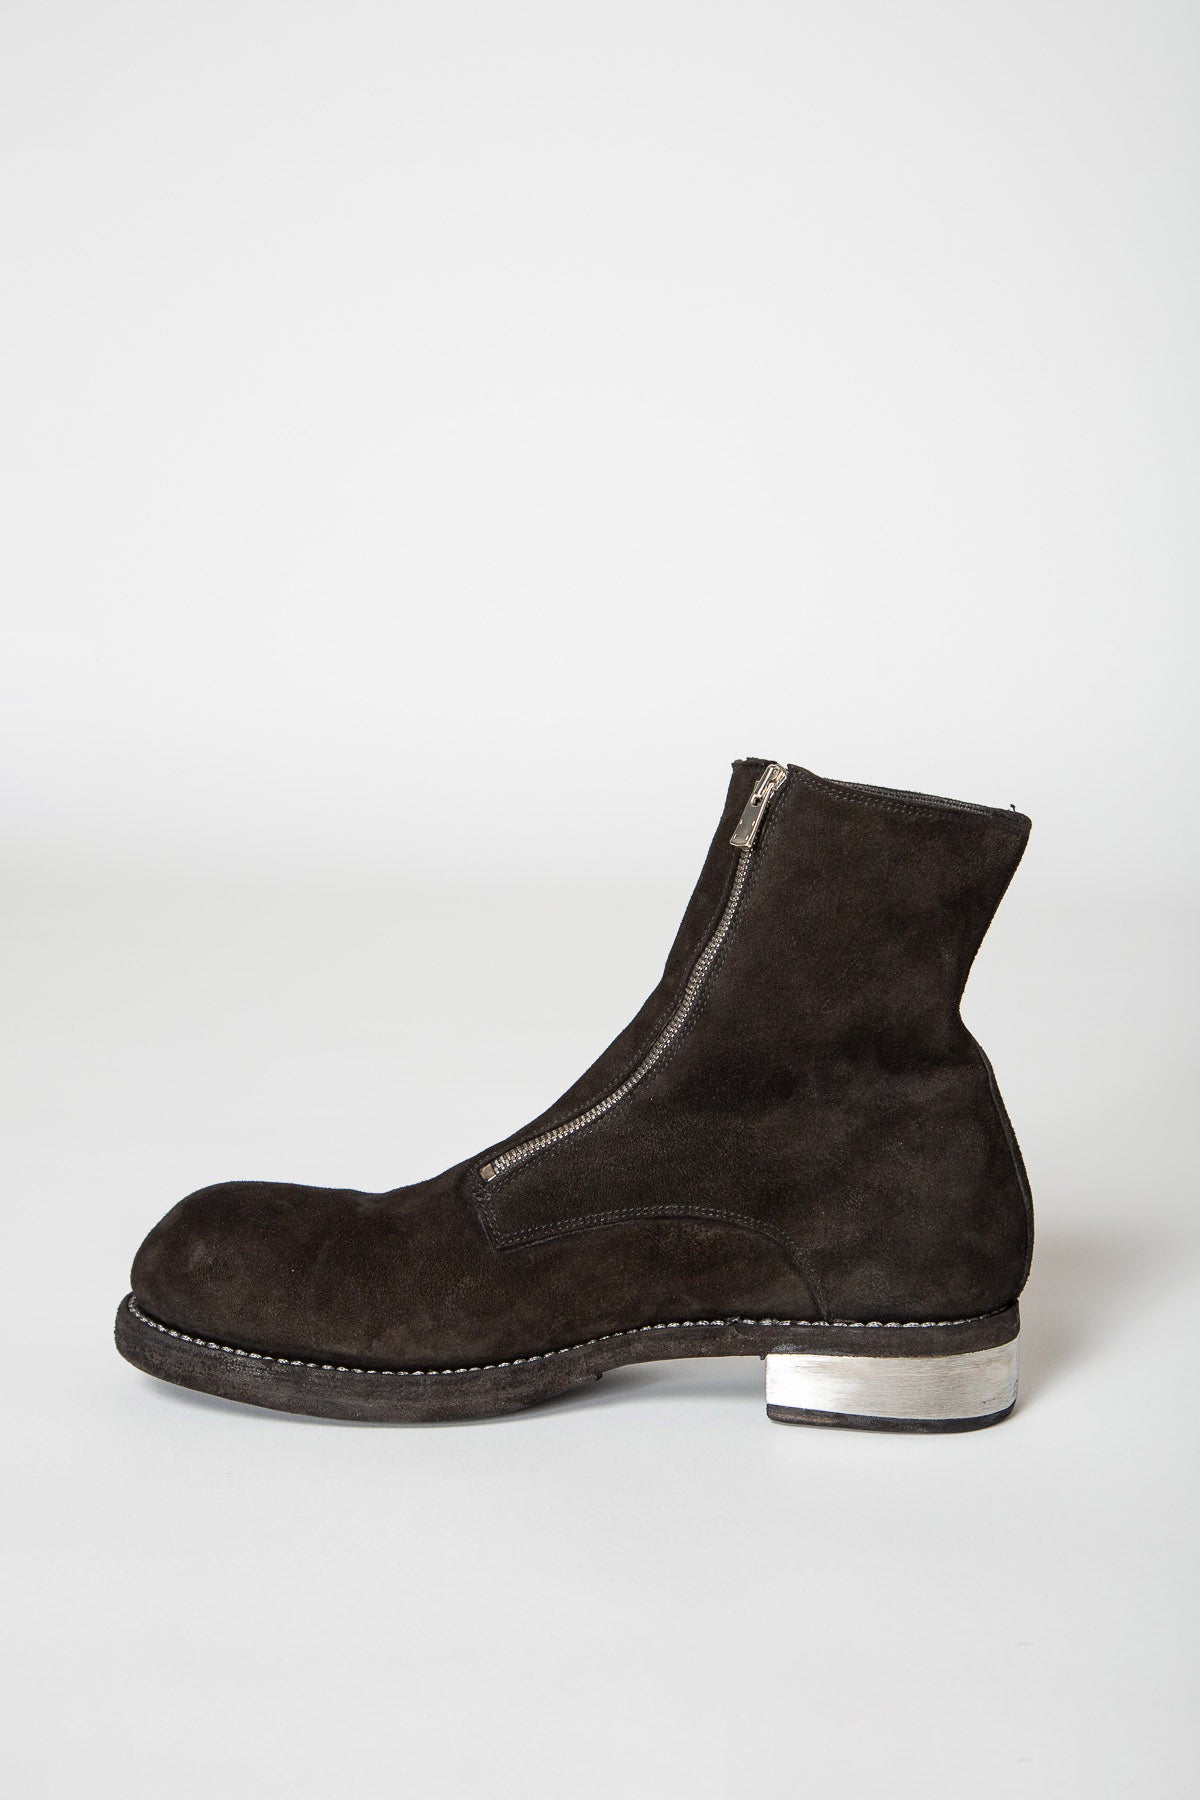 GUIDI | DOUBLE ZIP BIG DADDY BOOTS